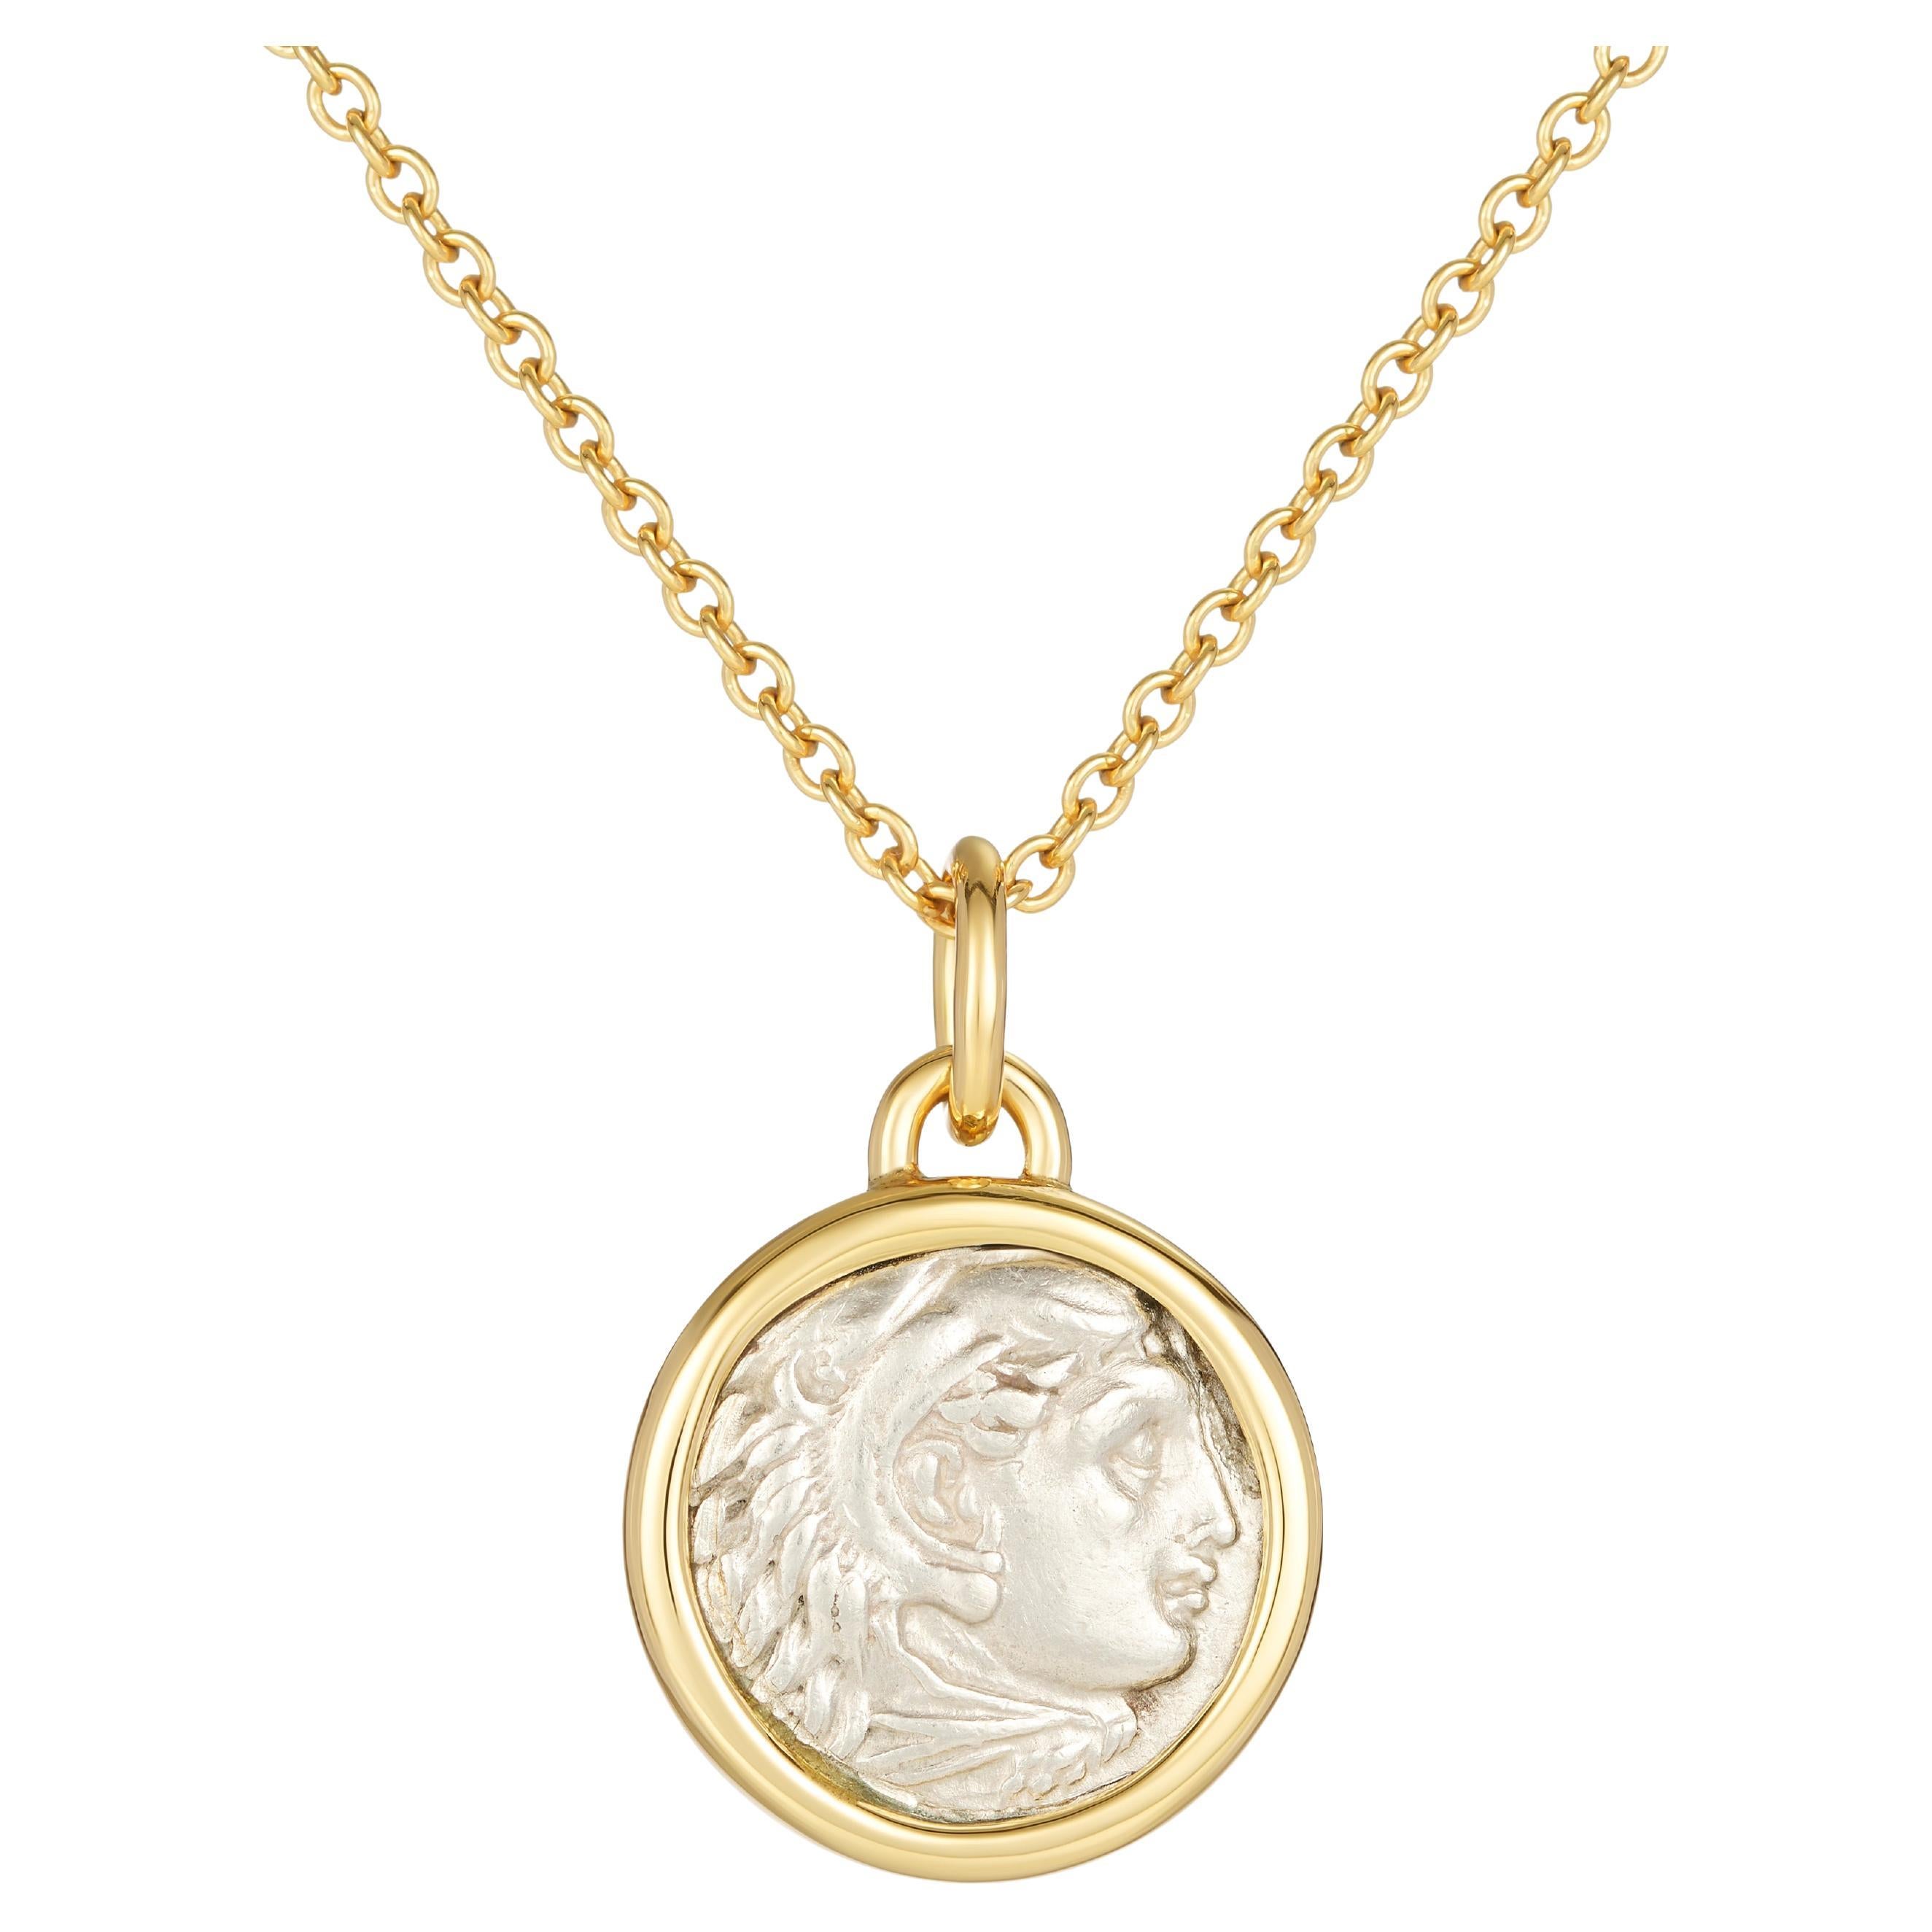 Dubini Alexander the Great Silver Coin Pendant 18K Gold Necklace For Sale